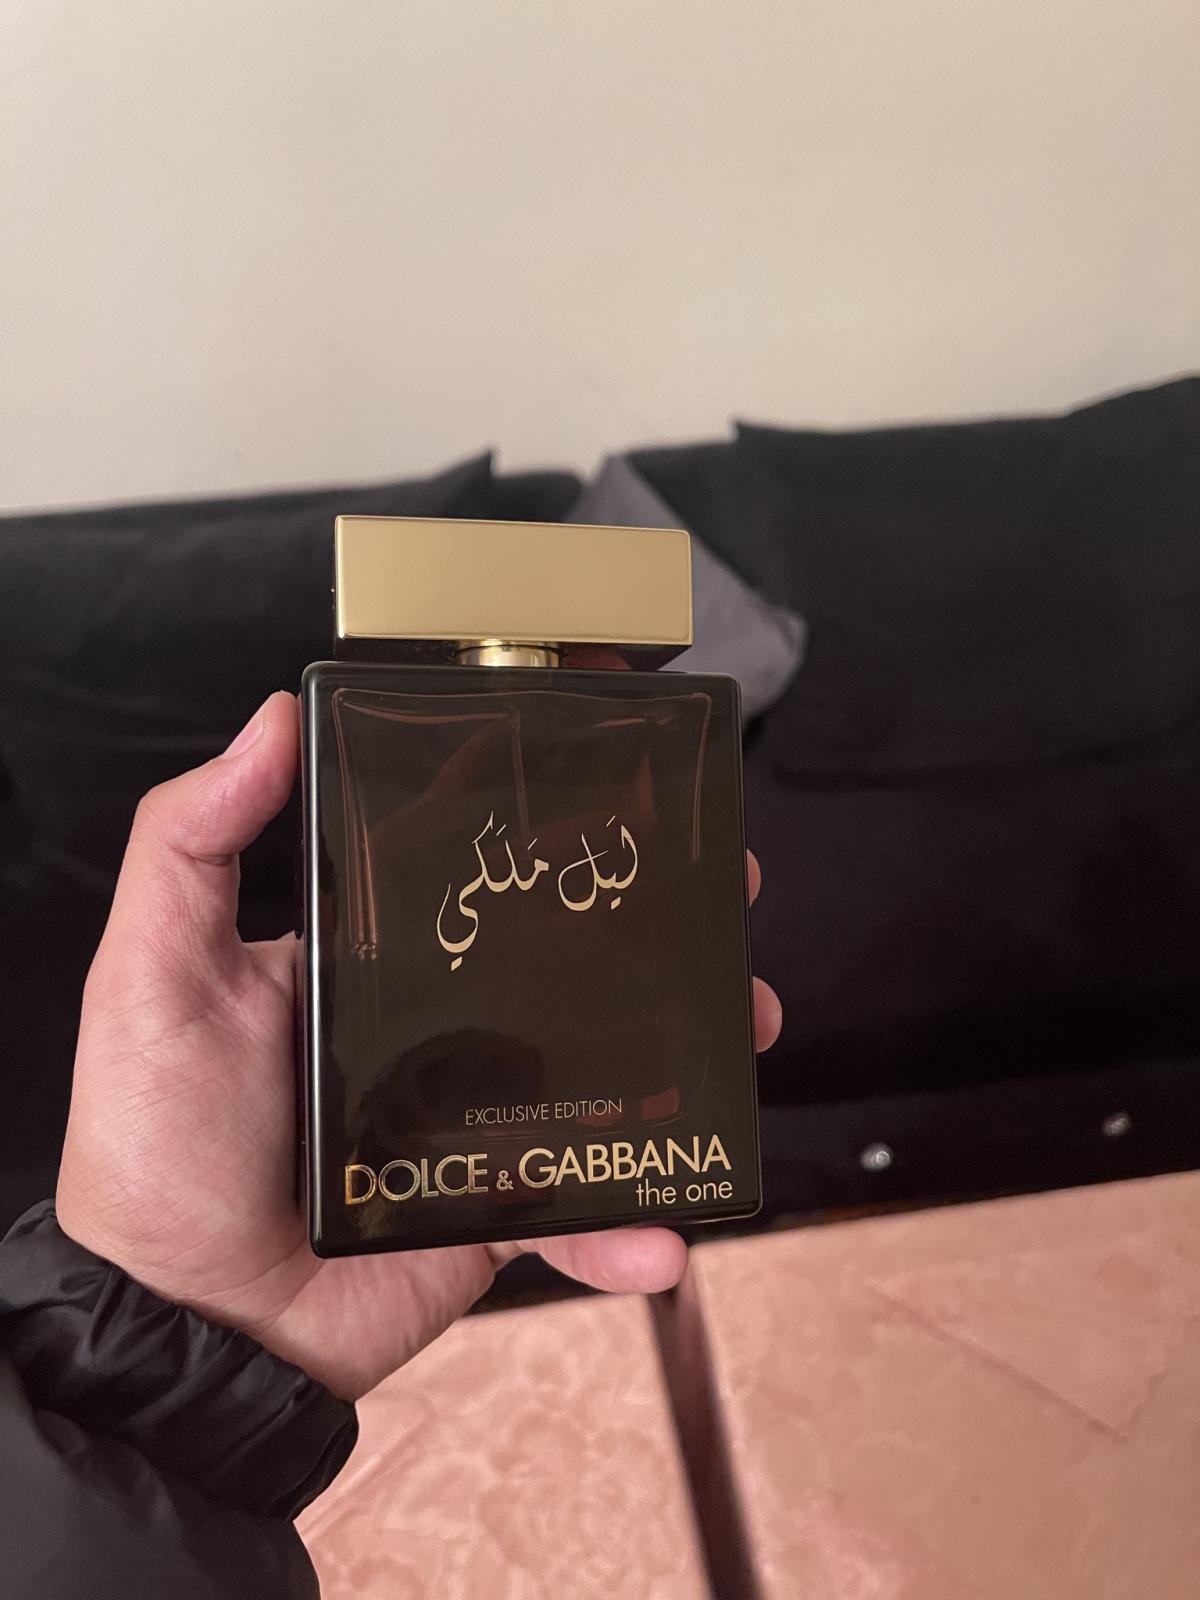 The One Royal Night Dolce&Gabbana cologne - a fragrance for men 2015